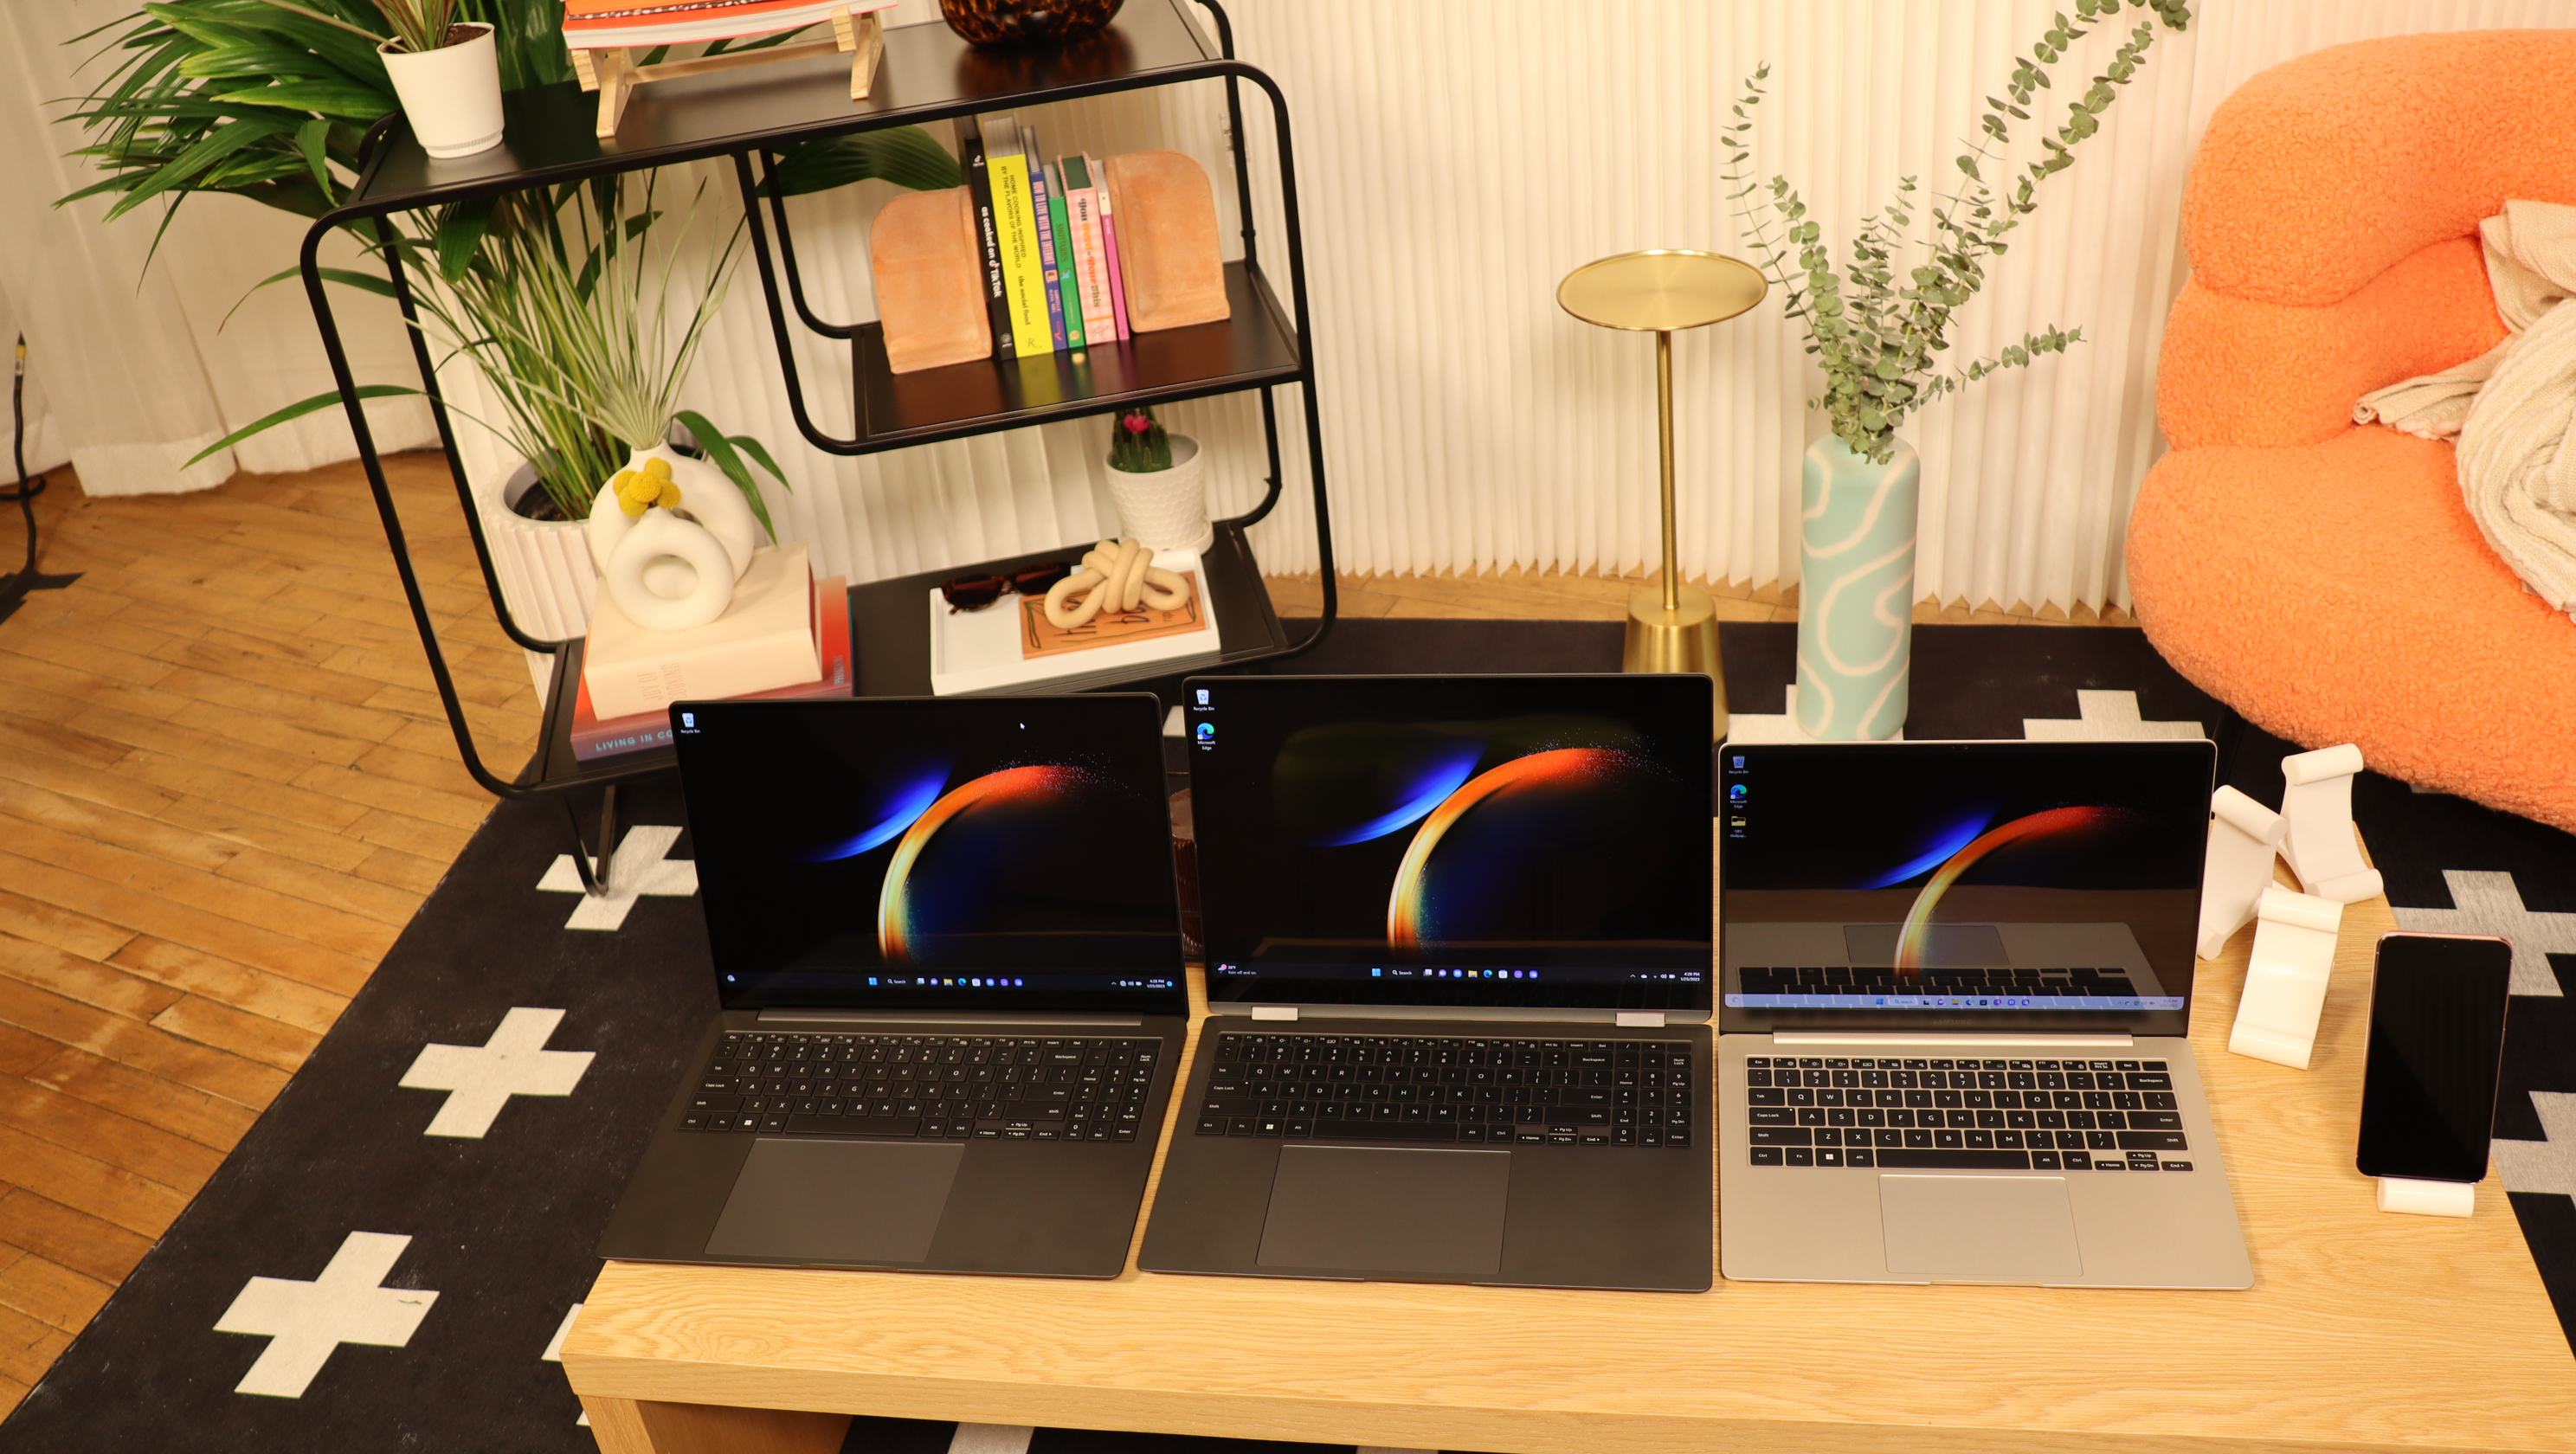 Three Samsung Galaxy Book3 sat next to each other on a wooden table